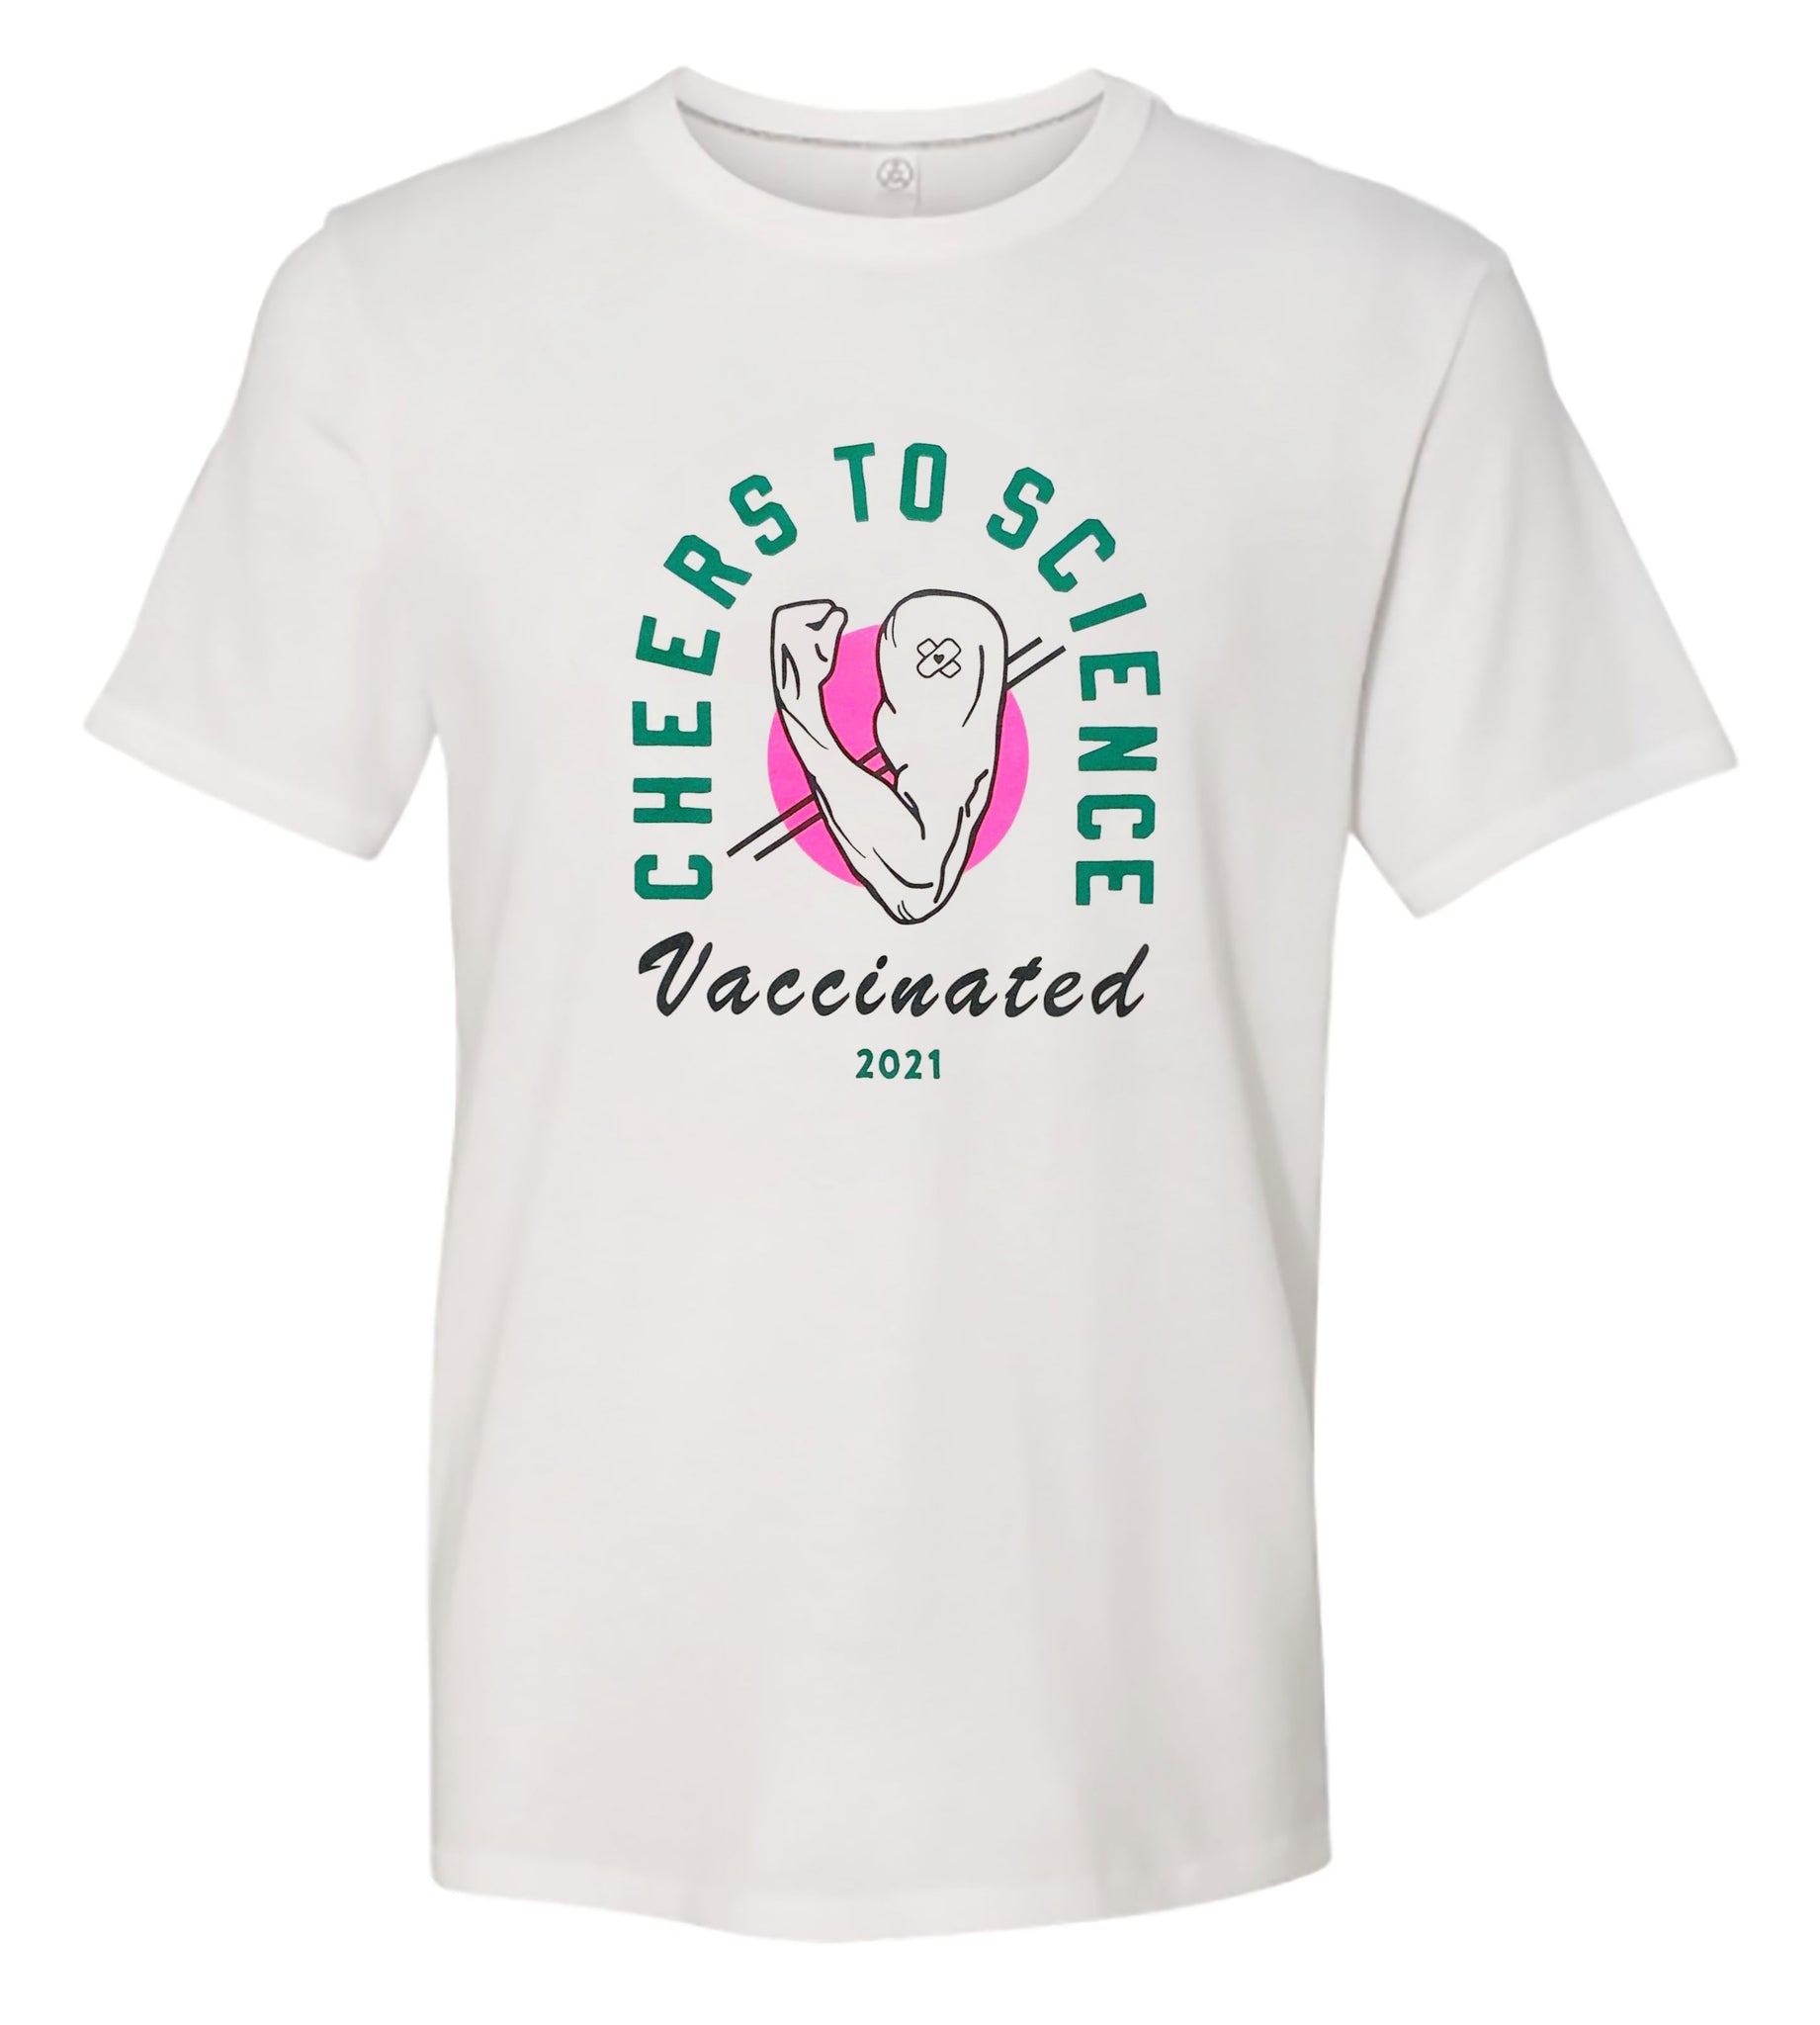 Cheers To Science, Vaccinated 2021 T-Shirt / White Tee